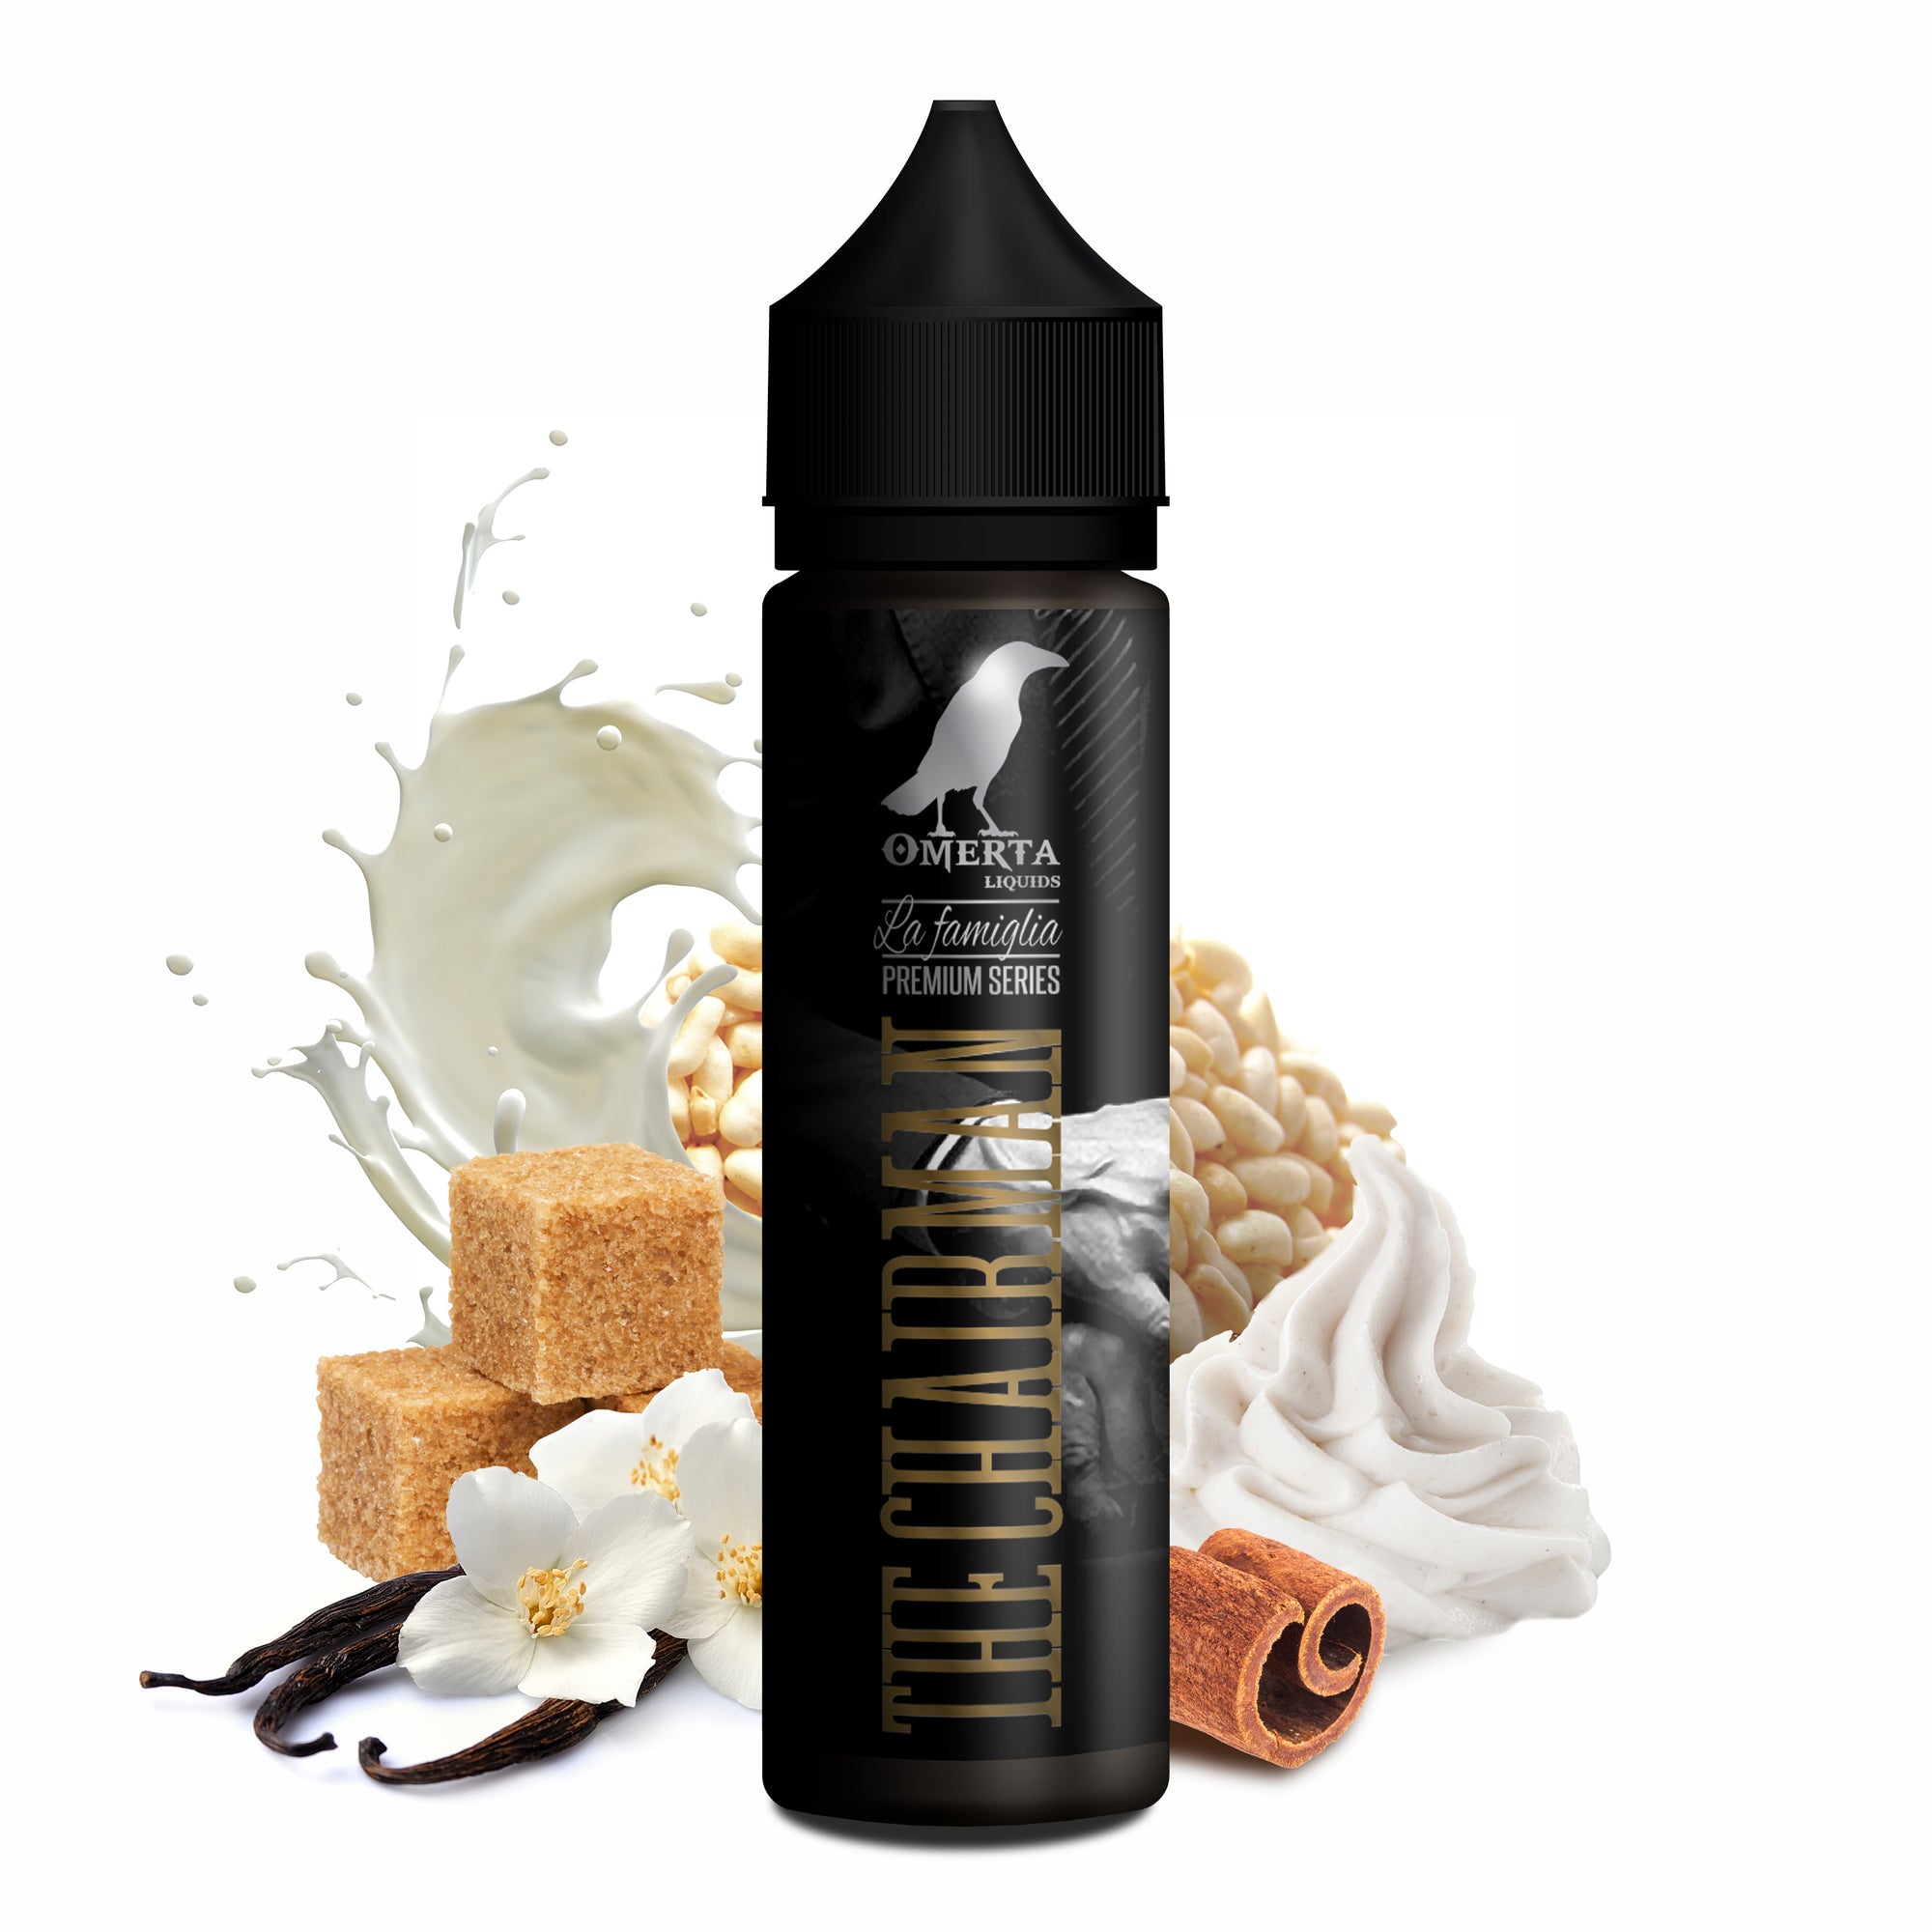 Buy THE CHAIRMAN BY OMERTA LIQUIDS - Wick And Wire Co Melbourne Vape Shop, Victoria Australia